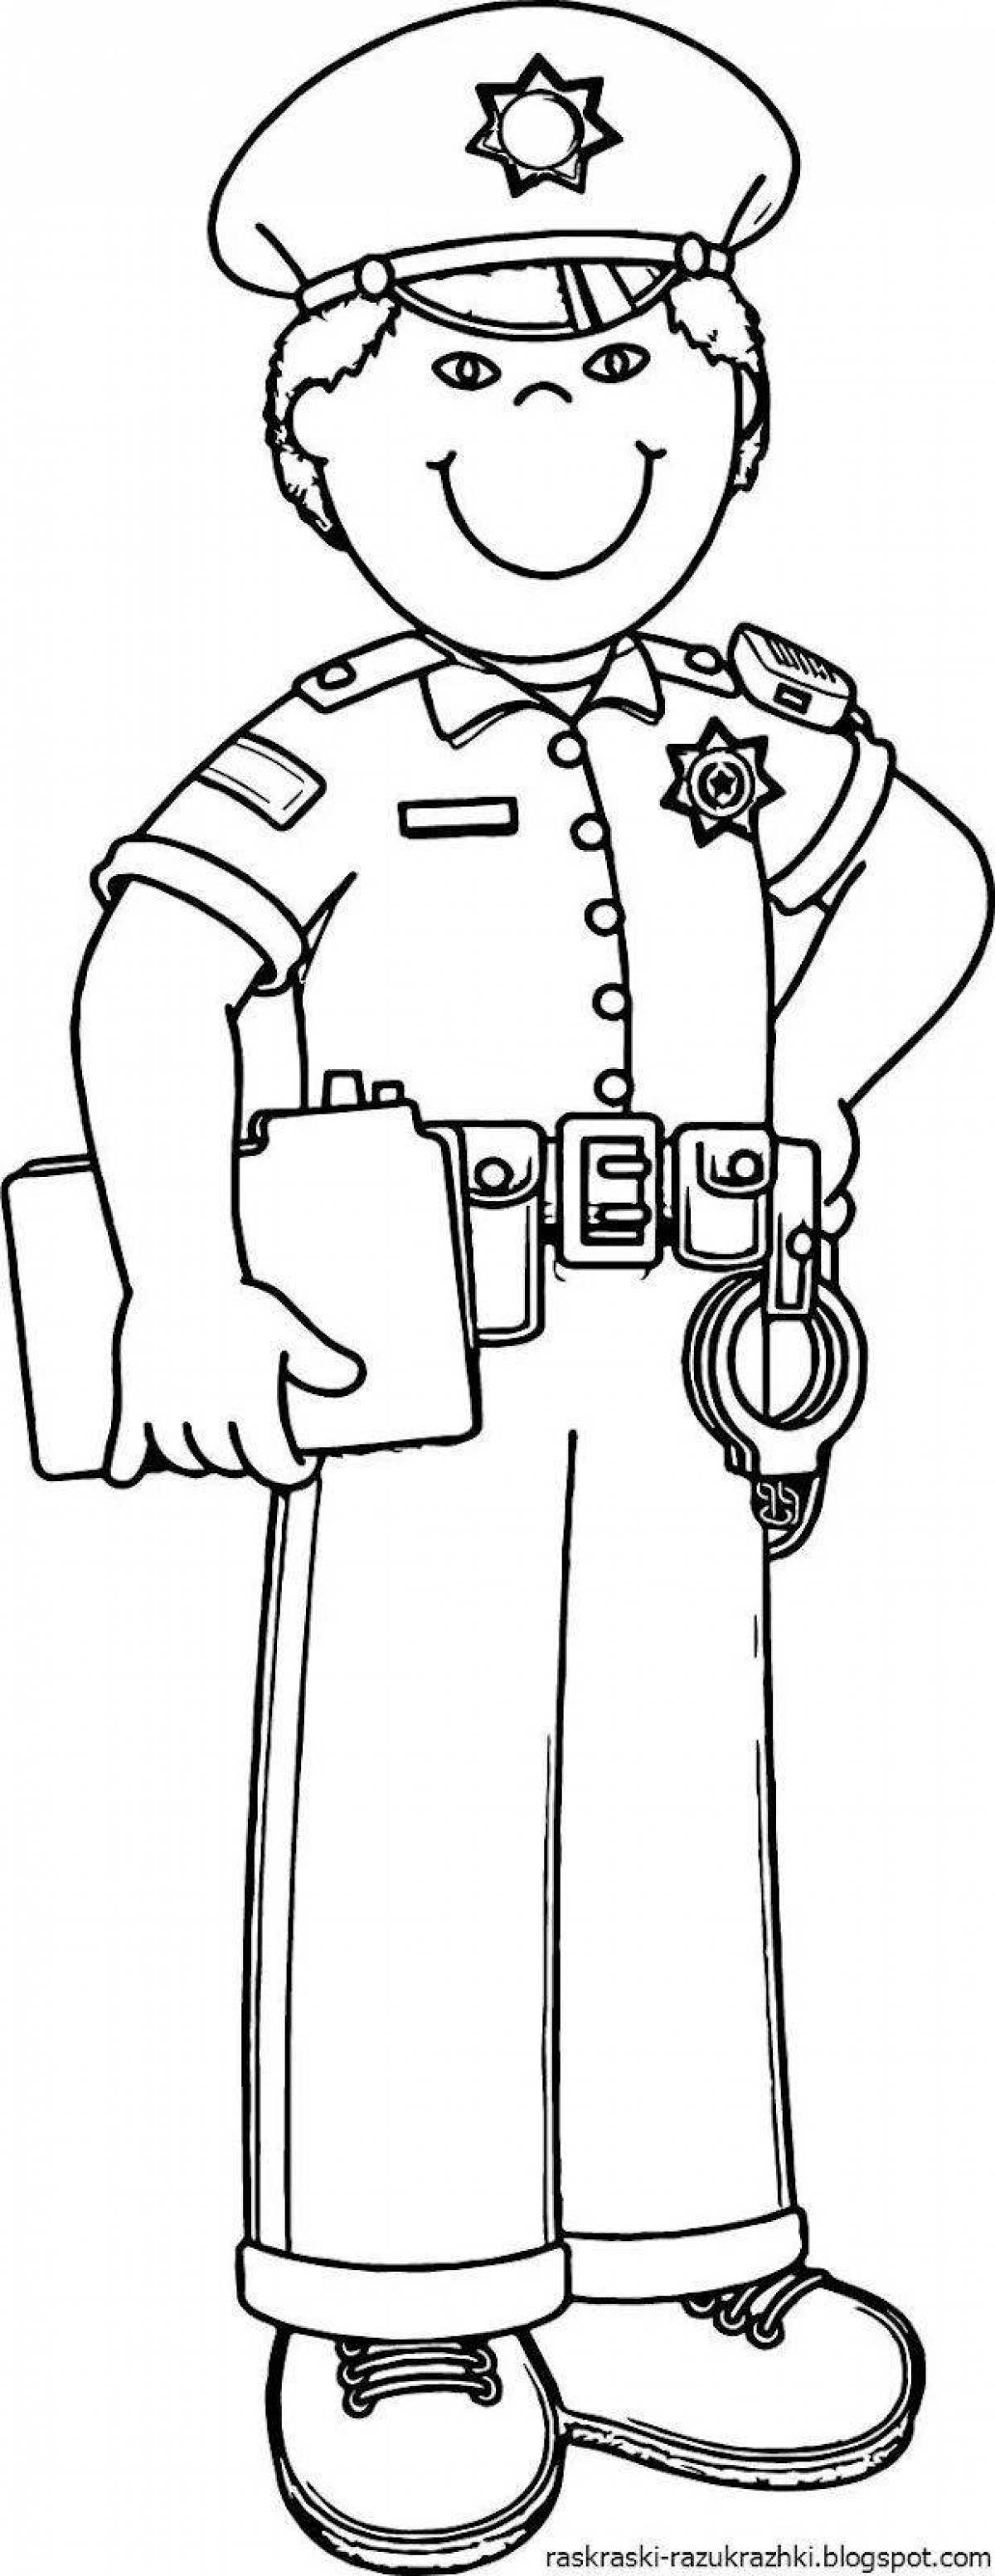 Coloring page traffic police inspector in colors